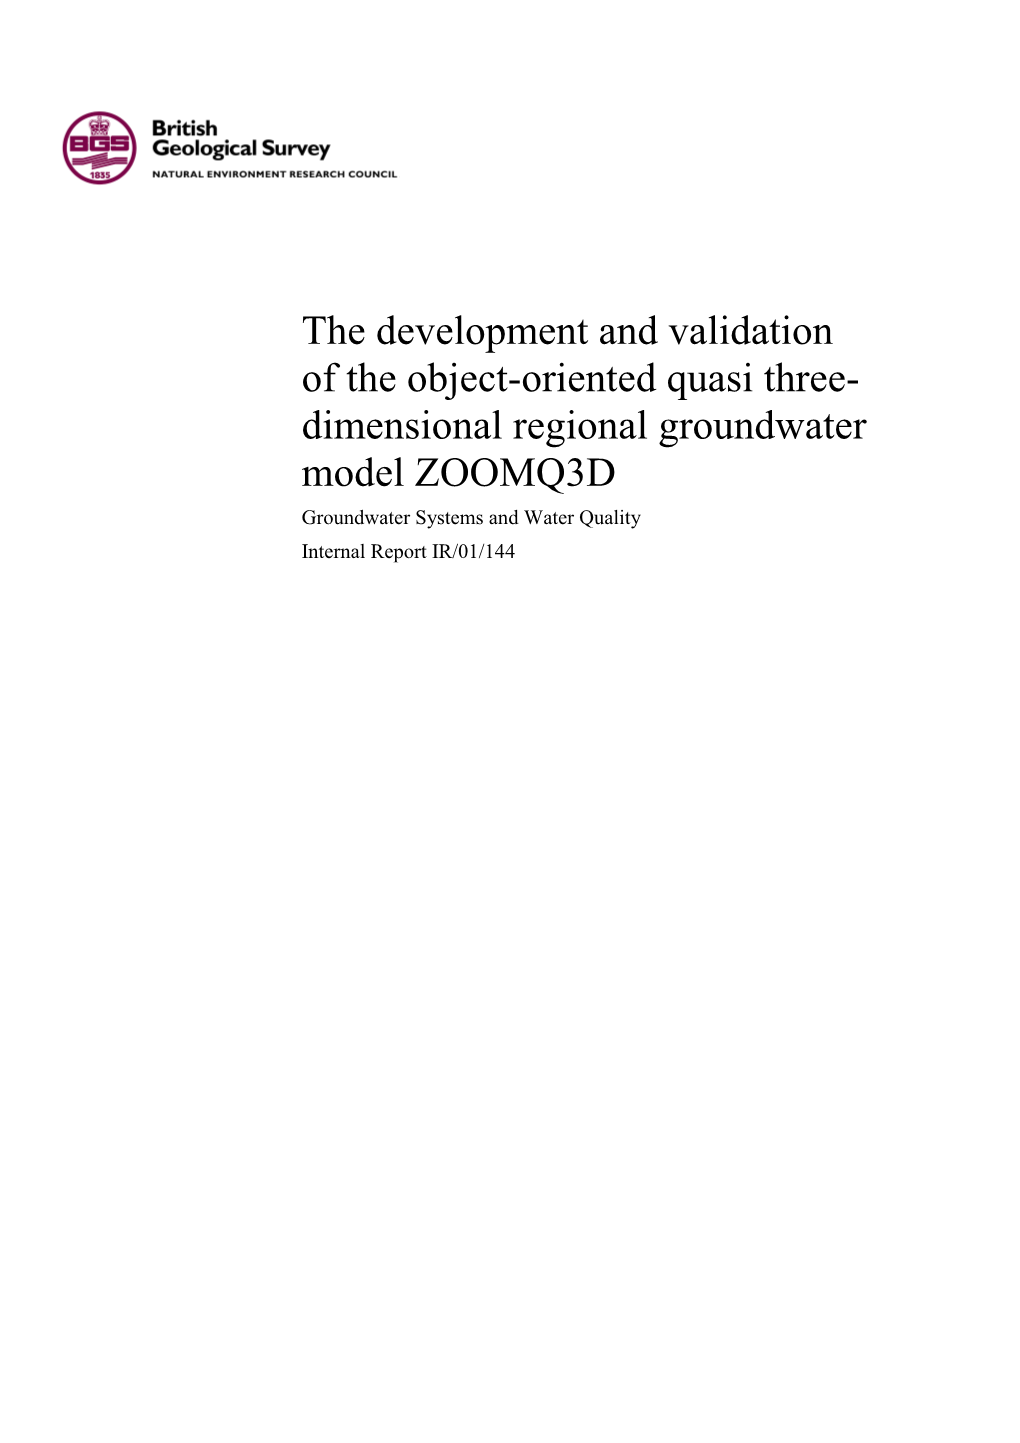 The Development and Validation of the Object-Oriented Quasi Three